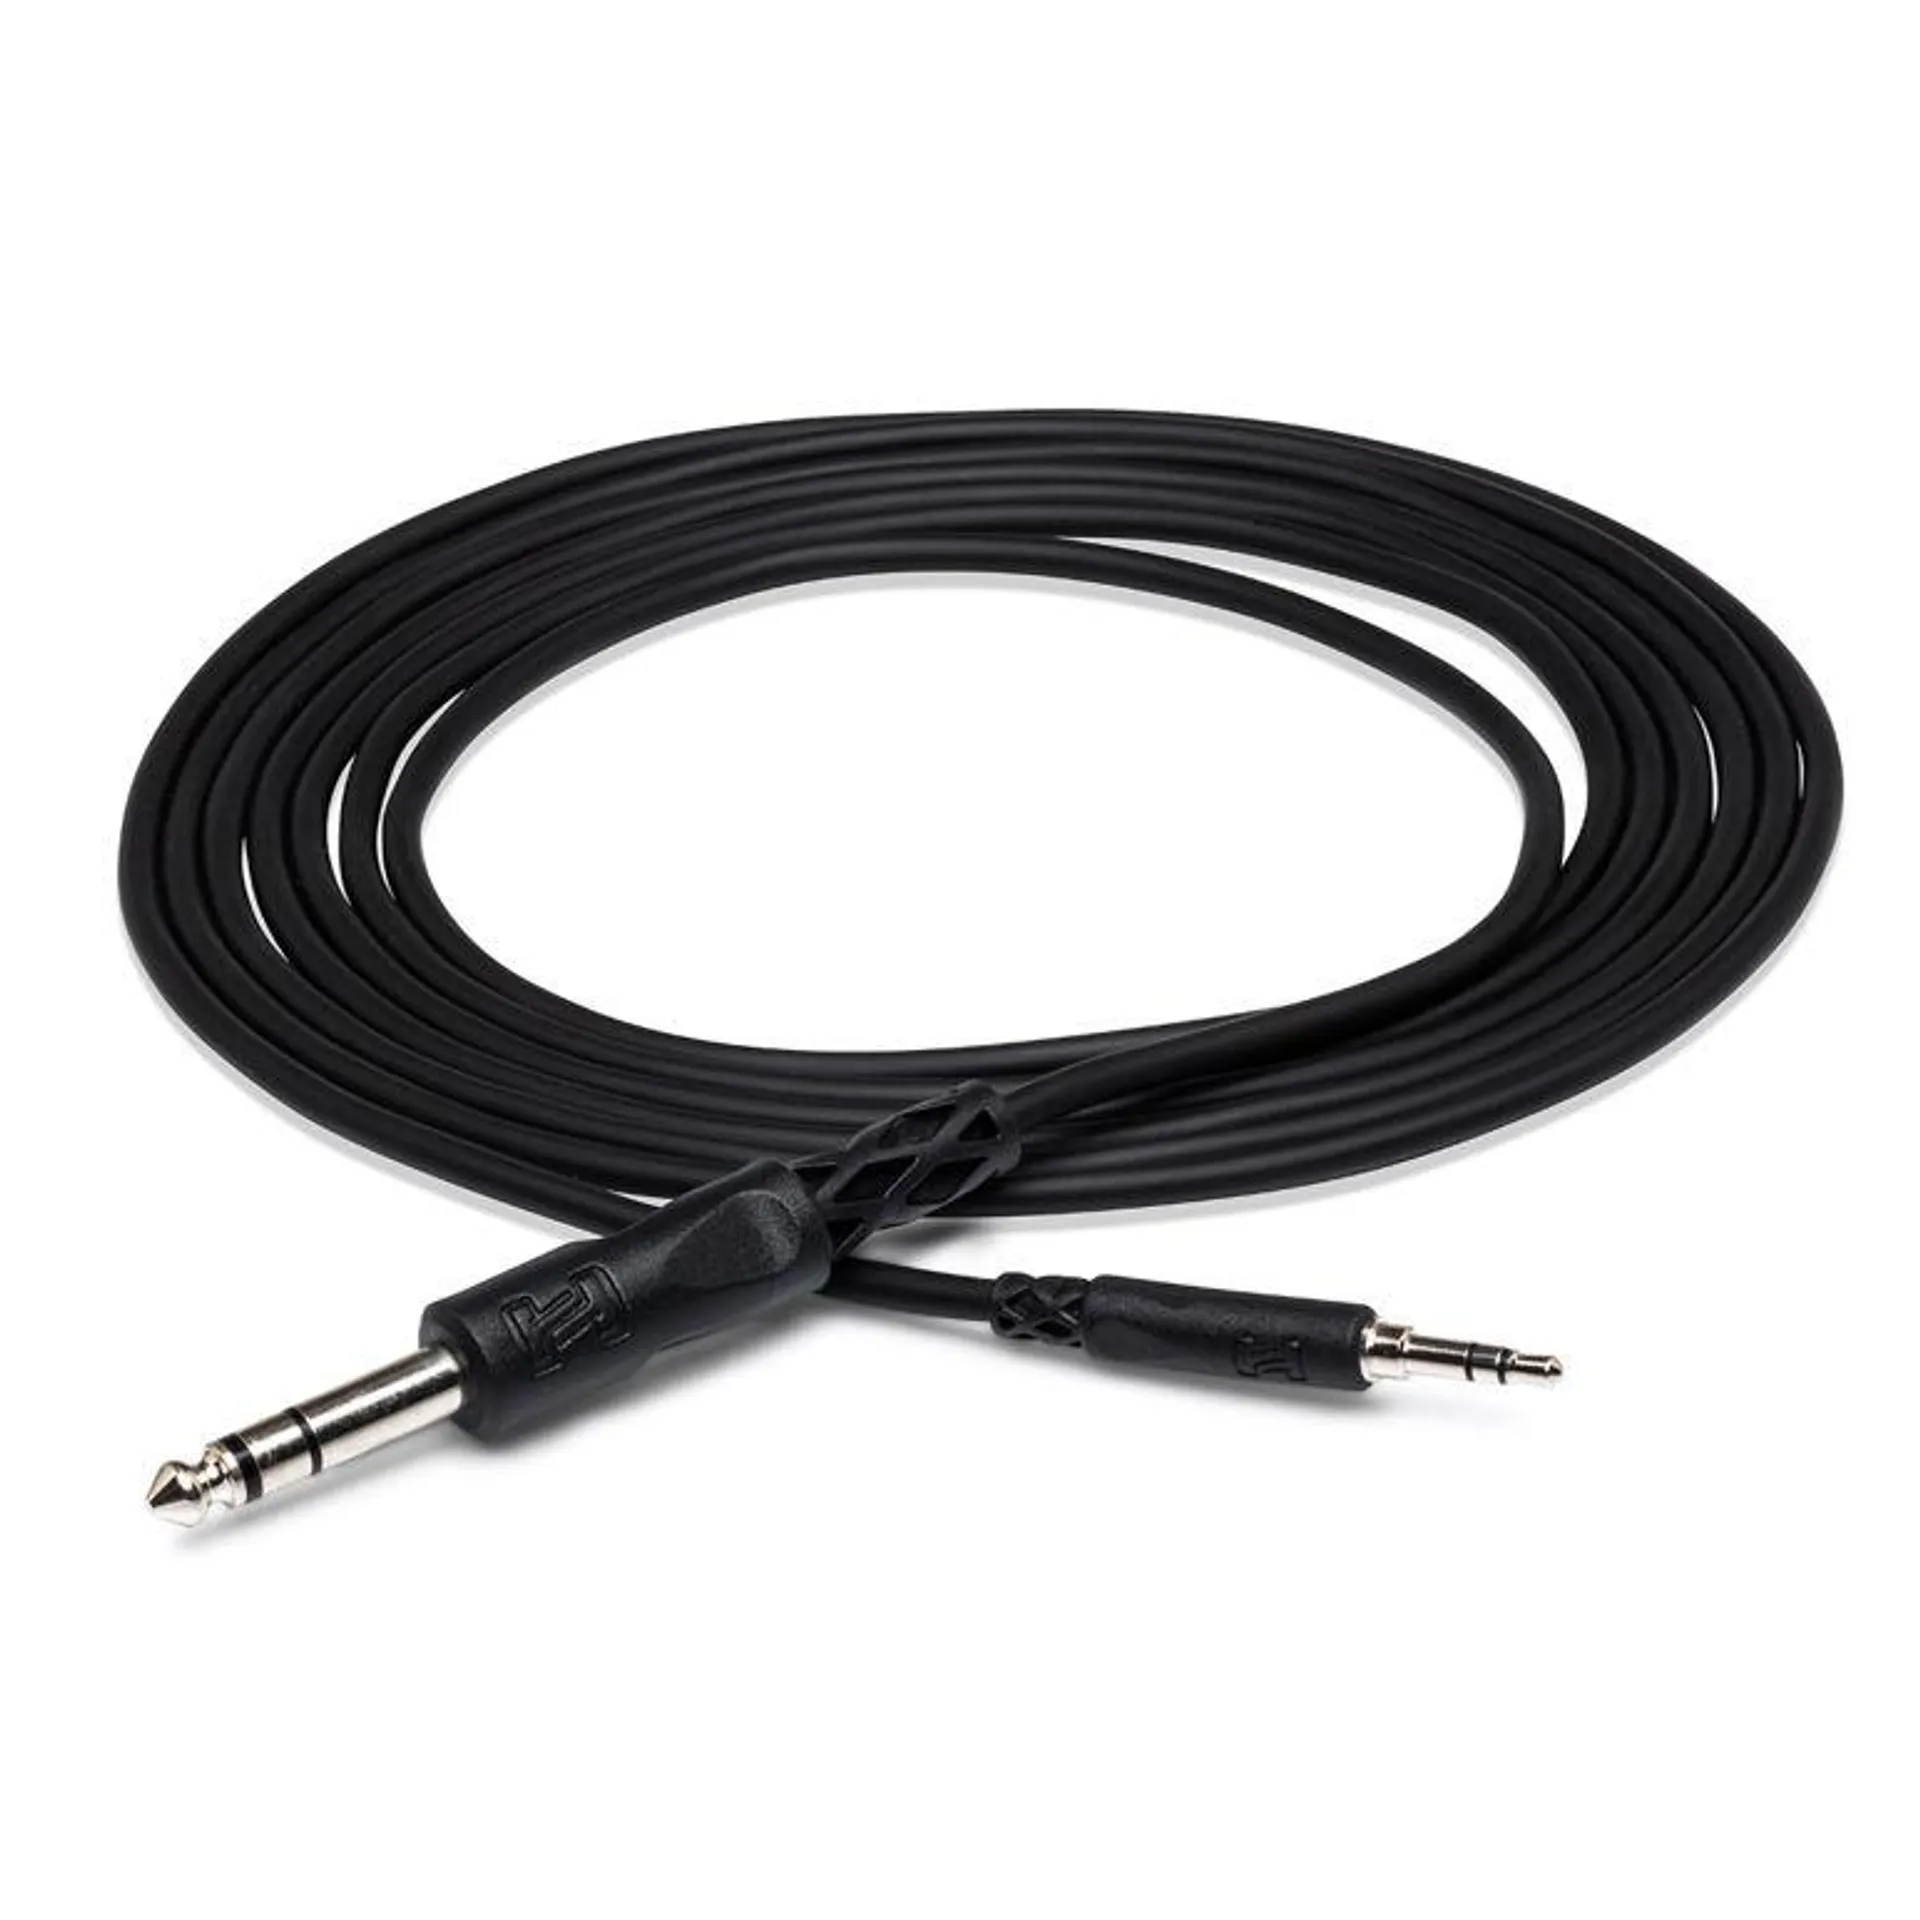 Hosa 3.5mm TRS to 1/4" TRS Cable, 10'